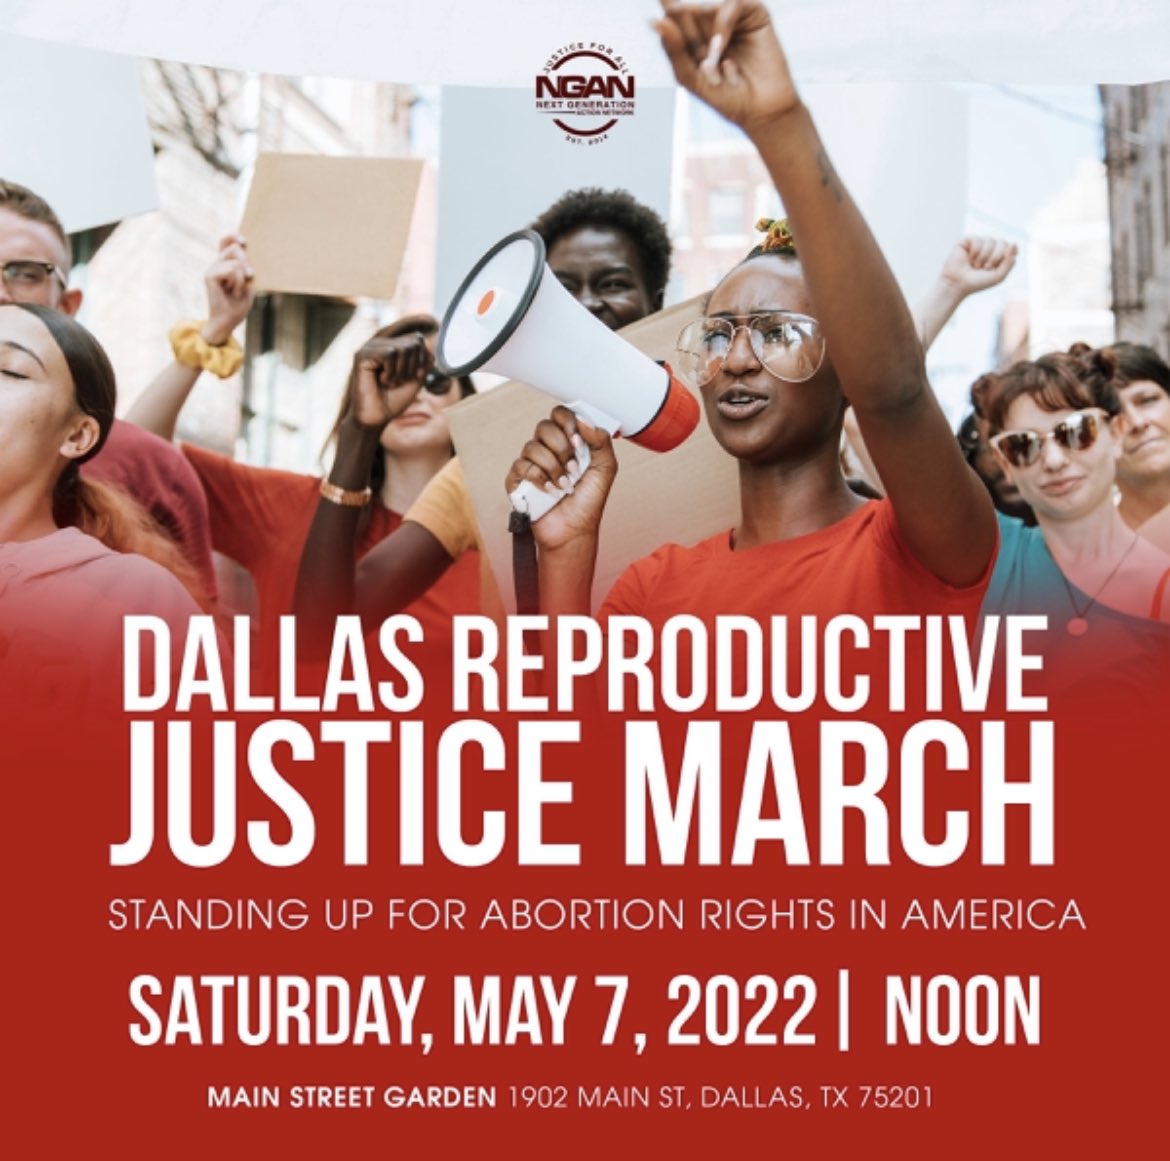 Dallas Texas is taking action! Protect Roe V Wade and women's rights to choice in America. #HerBodyHerChoice #Dallas #Dallasprotest #Prochoice